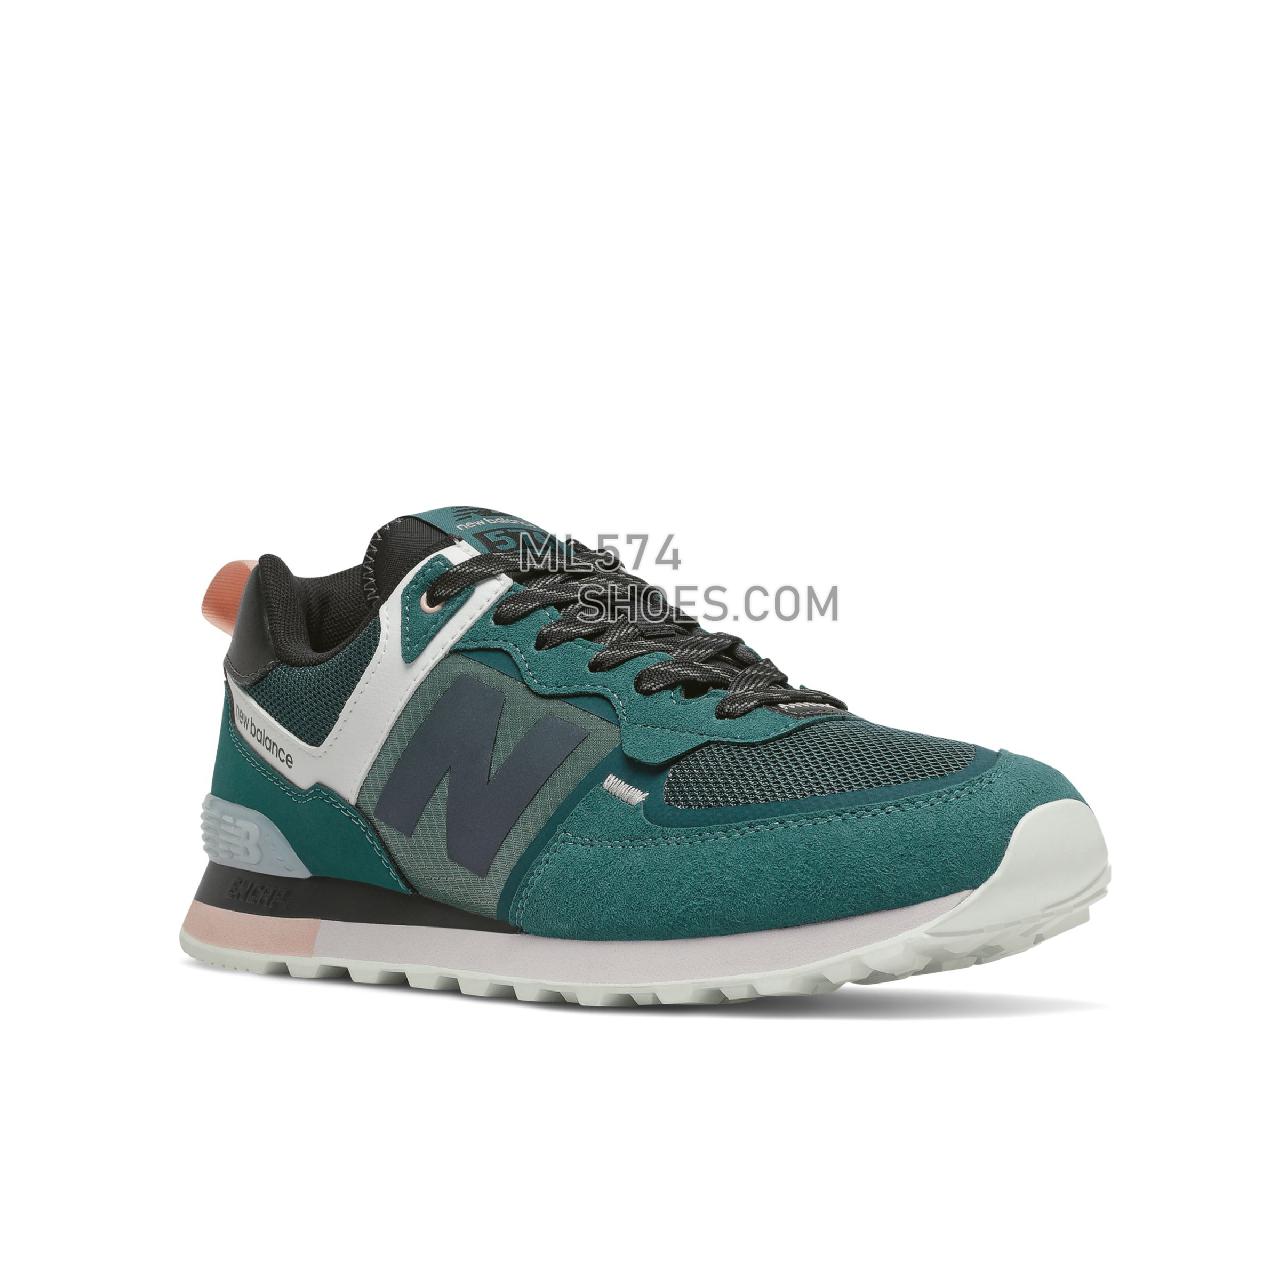 New Balance 574 - Men's Classic Sneakers - Mountain Teal with Oyster Pink - ML574IE2